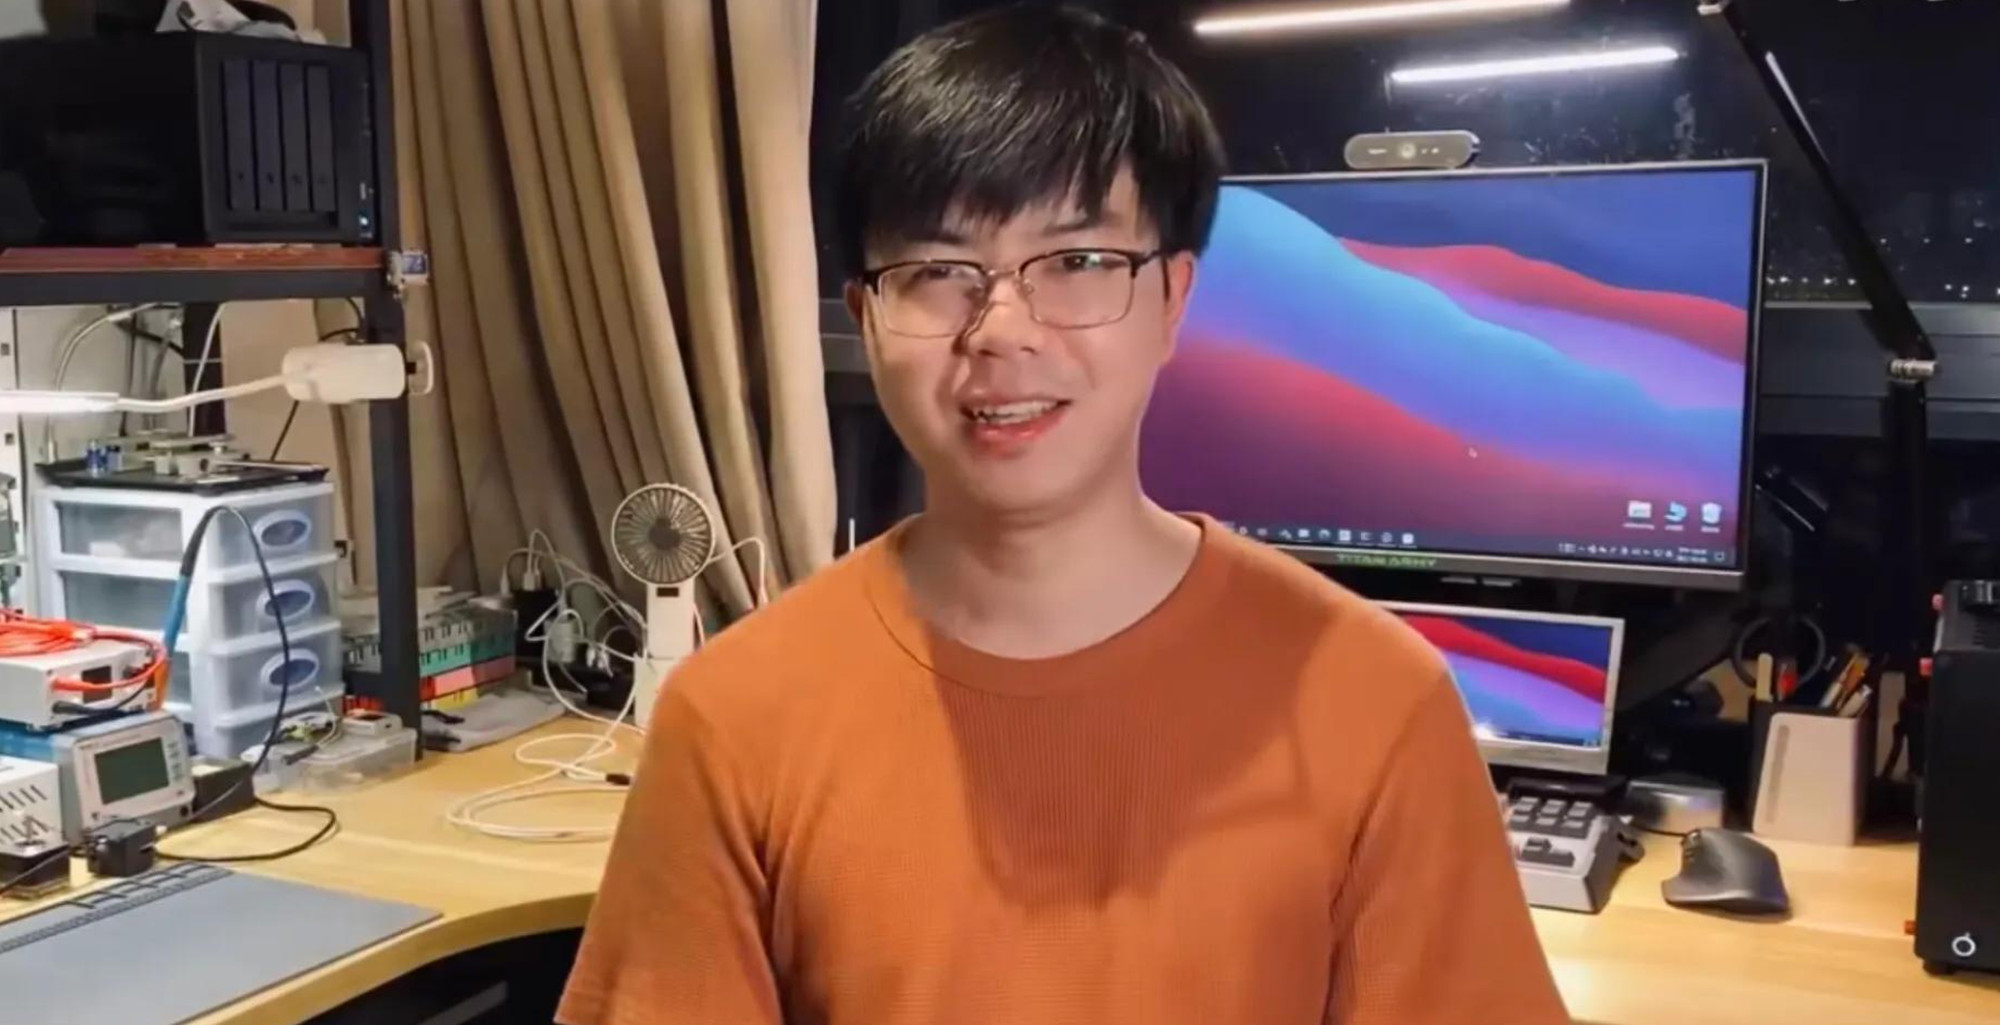 Peng Zhihui, a wunderkind in artificial intelligence, joined Huawei Technologies Co in 2020 through the company’s “Genius Youth” recruitment programme. Photo: Handout